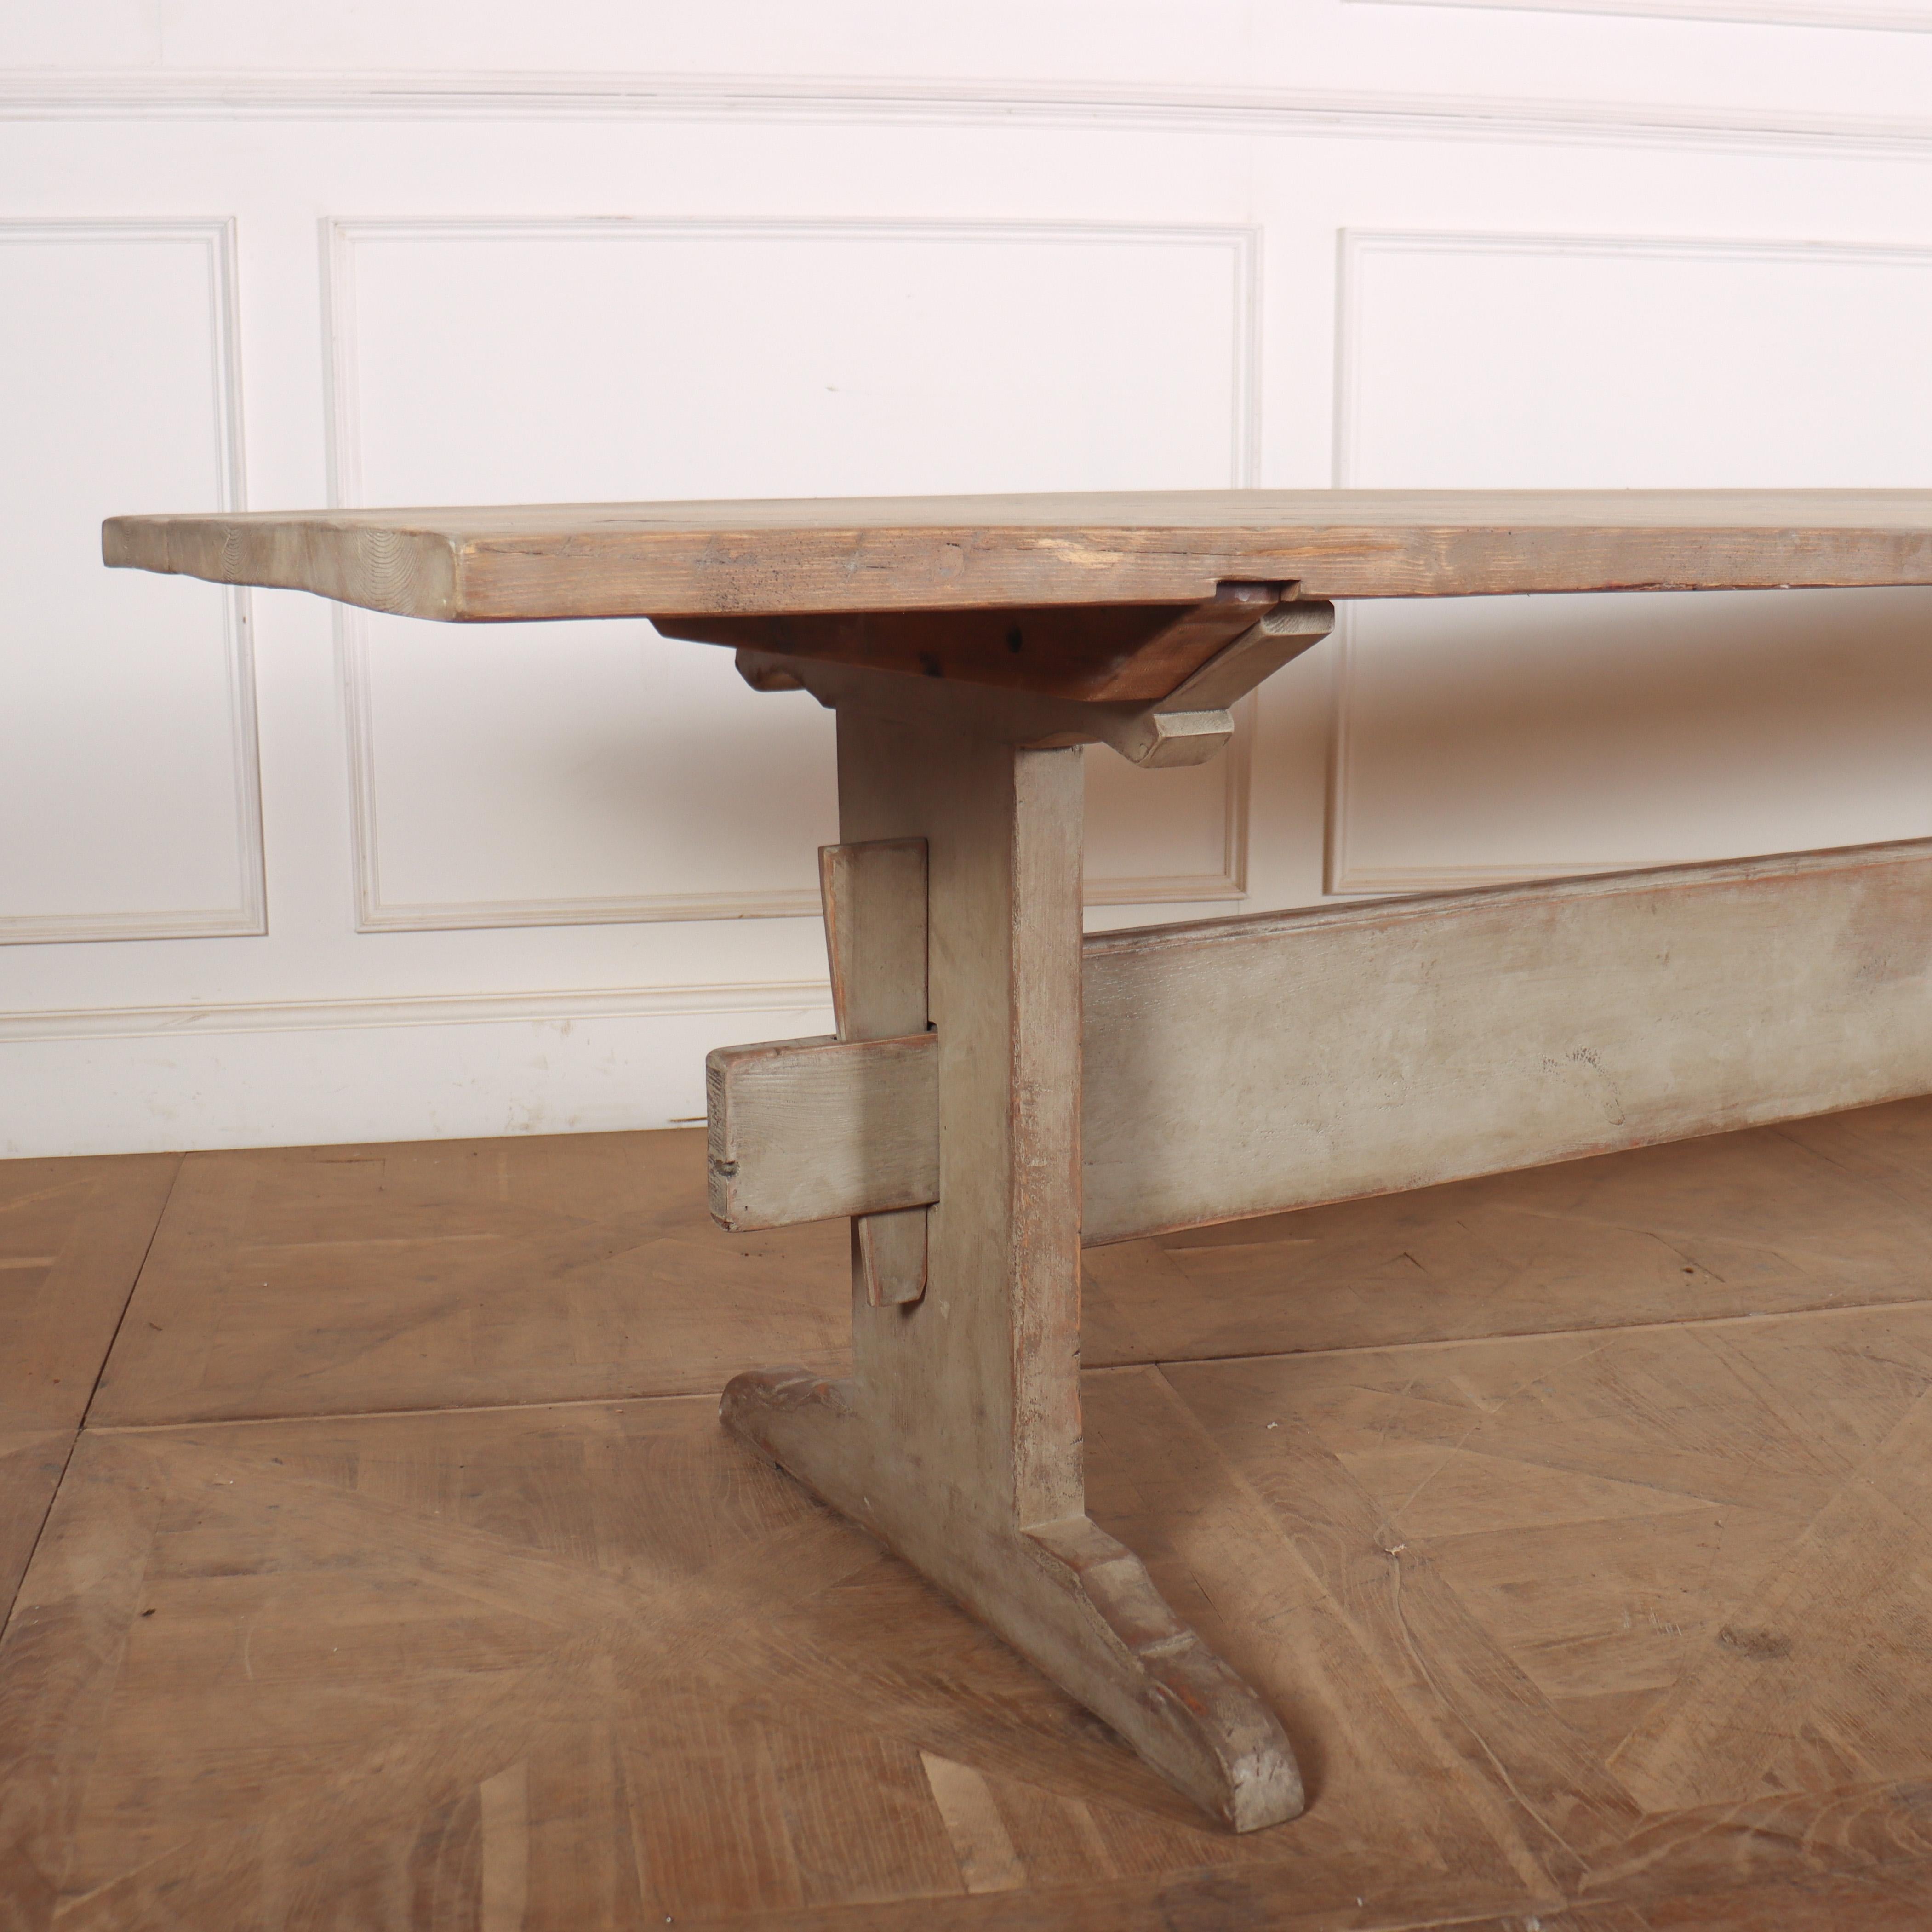 19th C Swedish painted pine tavern table. 1850.

Reference: 8373

Dimensions
110 inches (279 cms) Wide
34 inches (86 cms) Deep
30 inches (76 cms) High